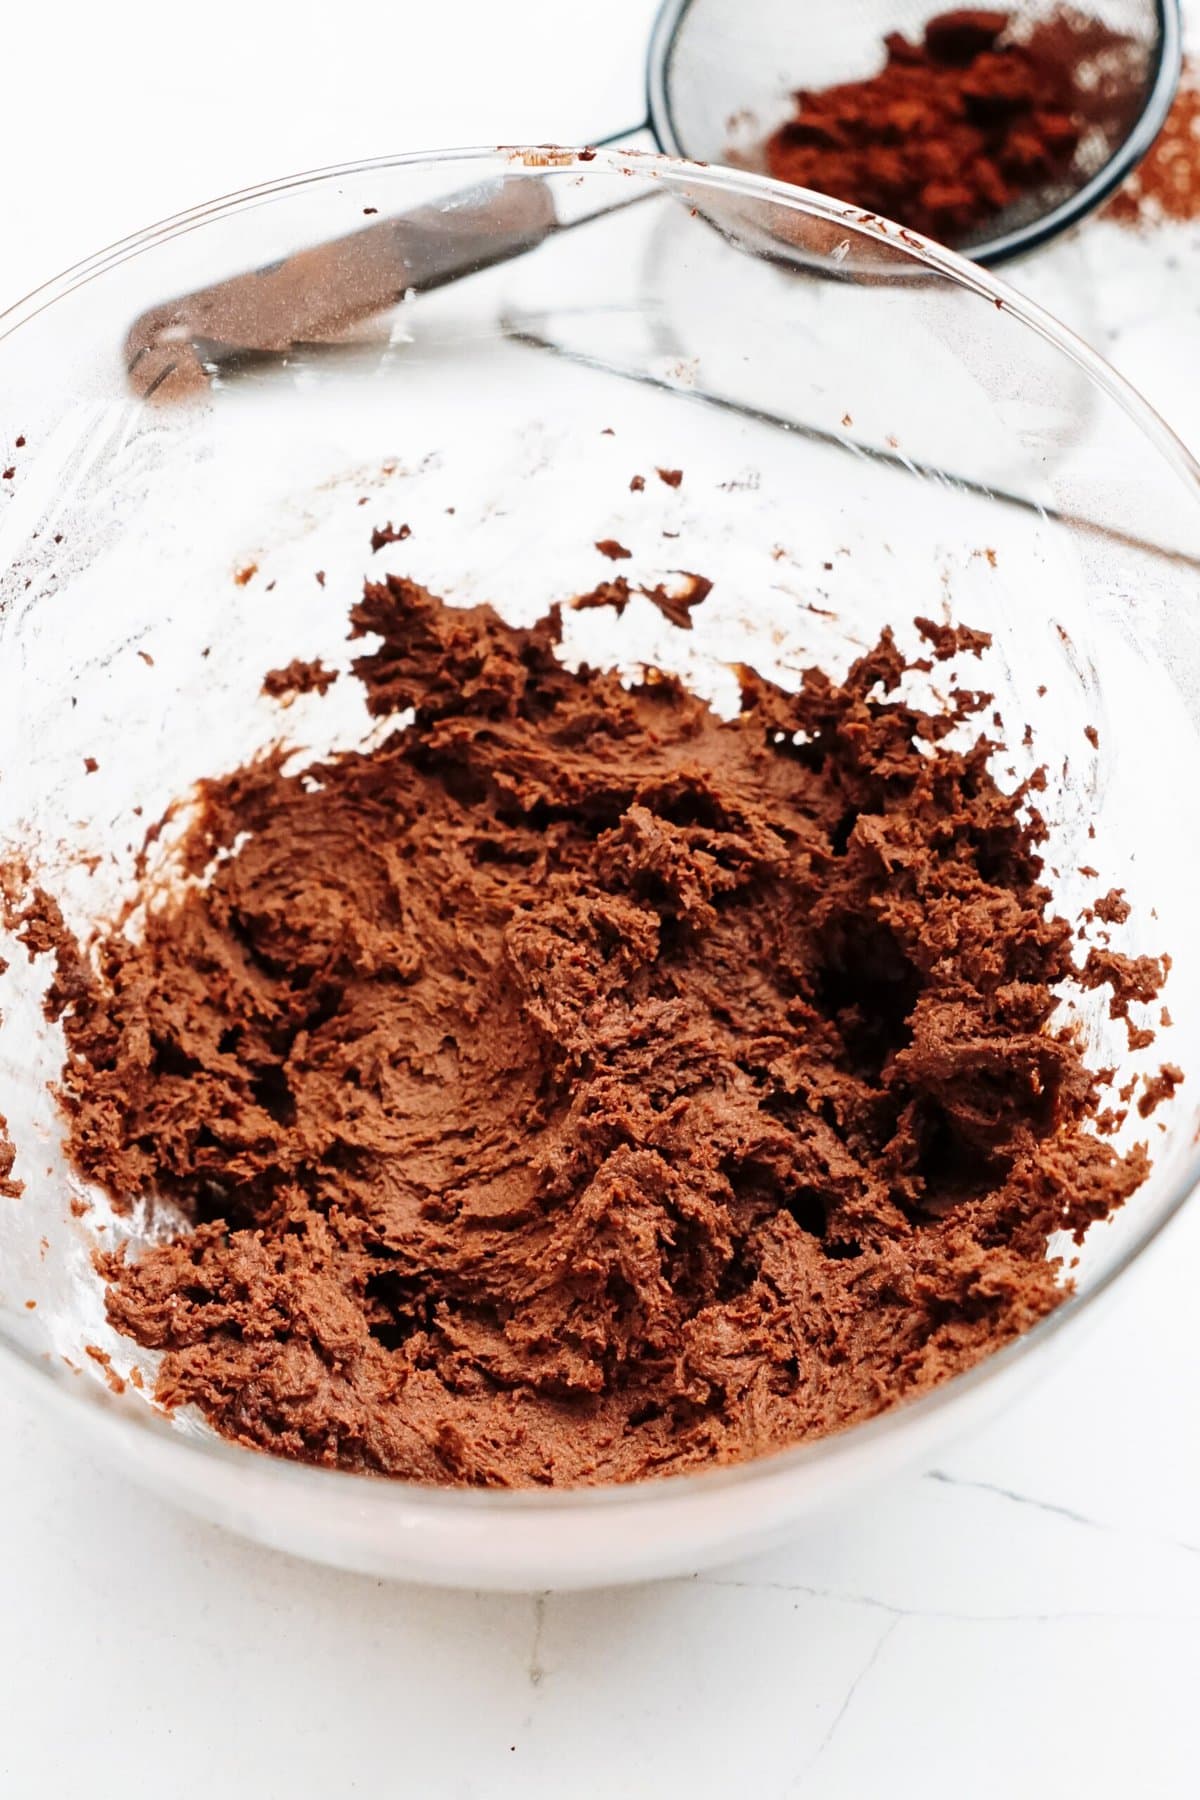 A bowl filled with chocolate frosting